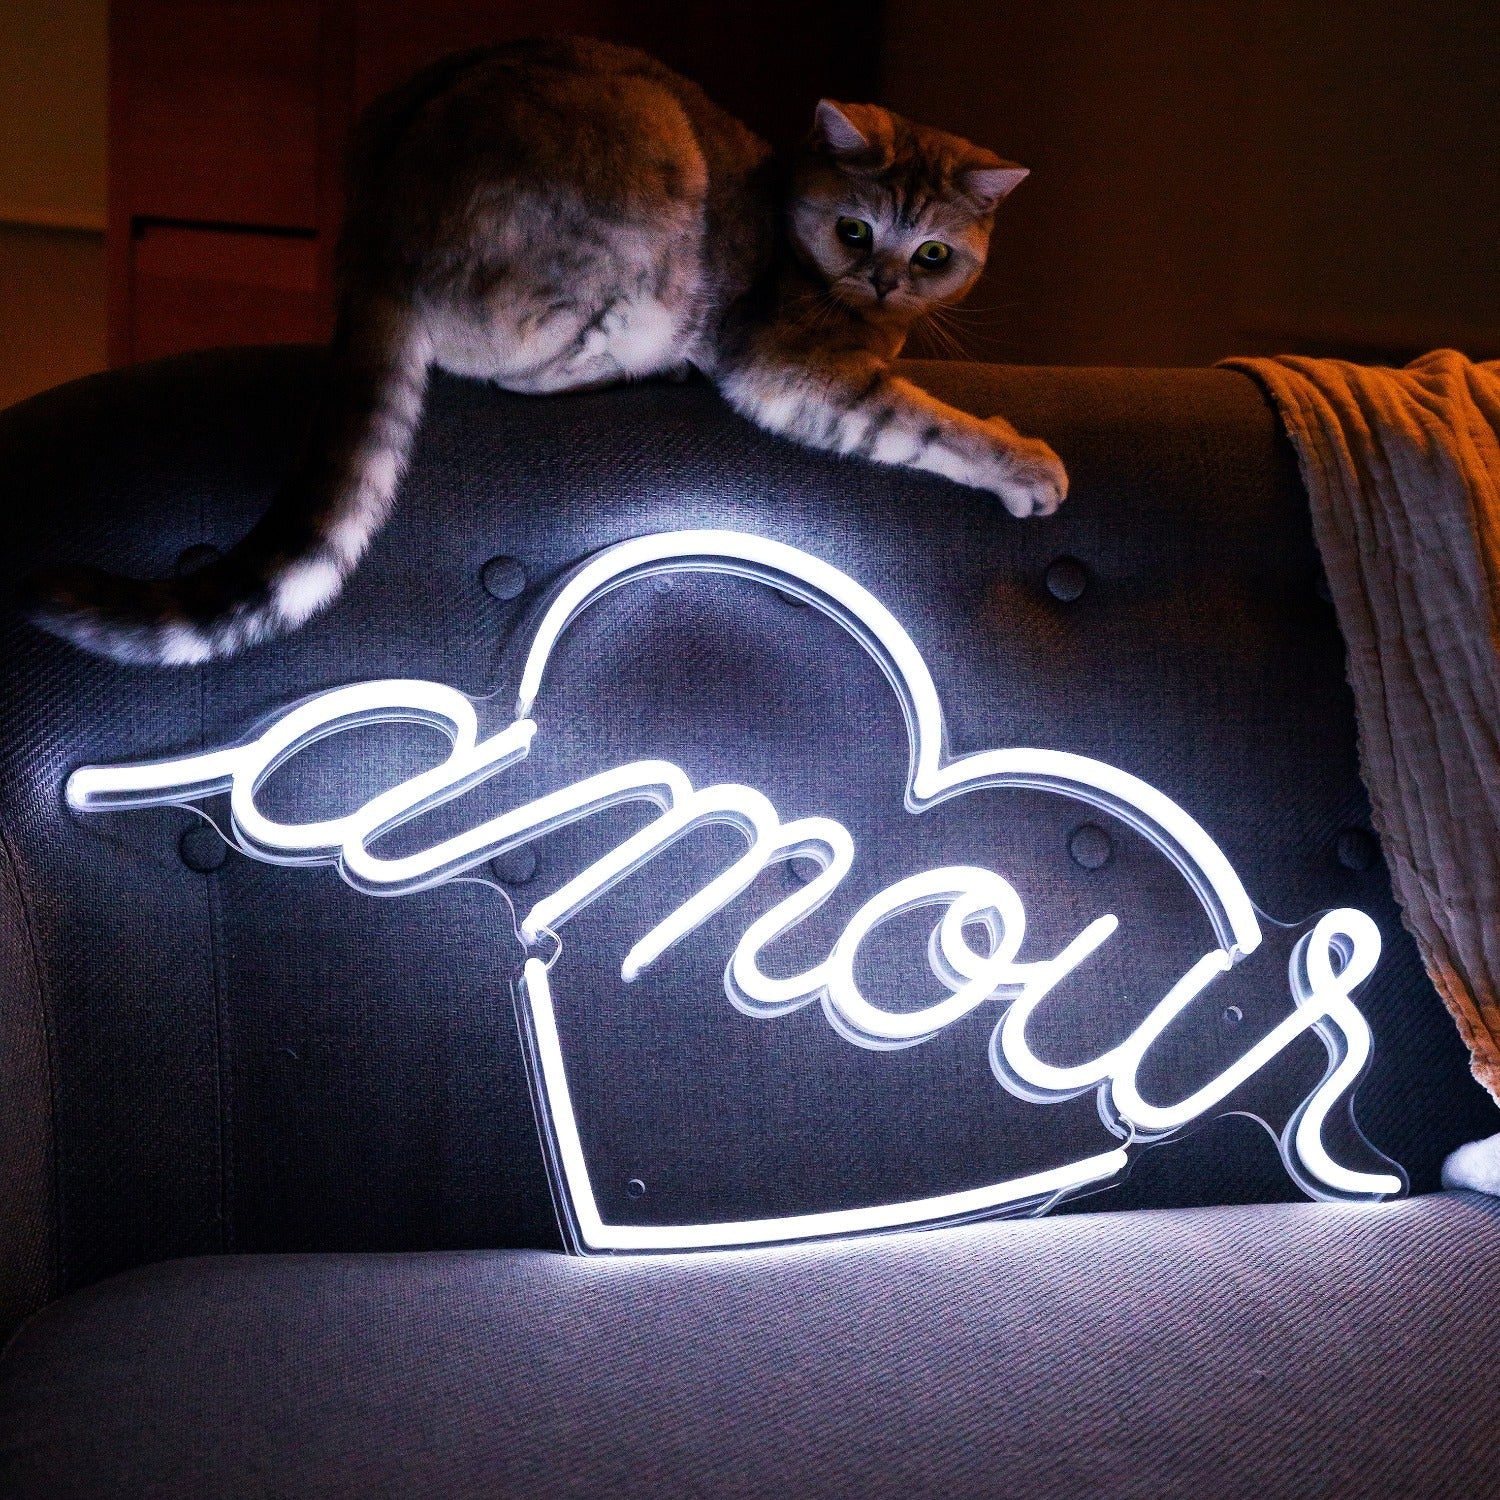 Amour by Jean André, Neon Tabela - Neonbir